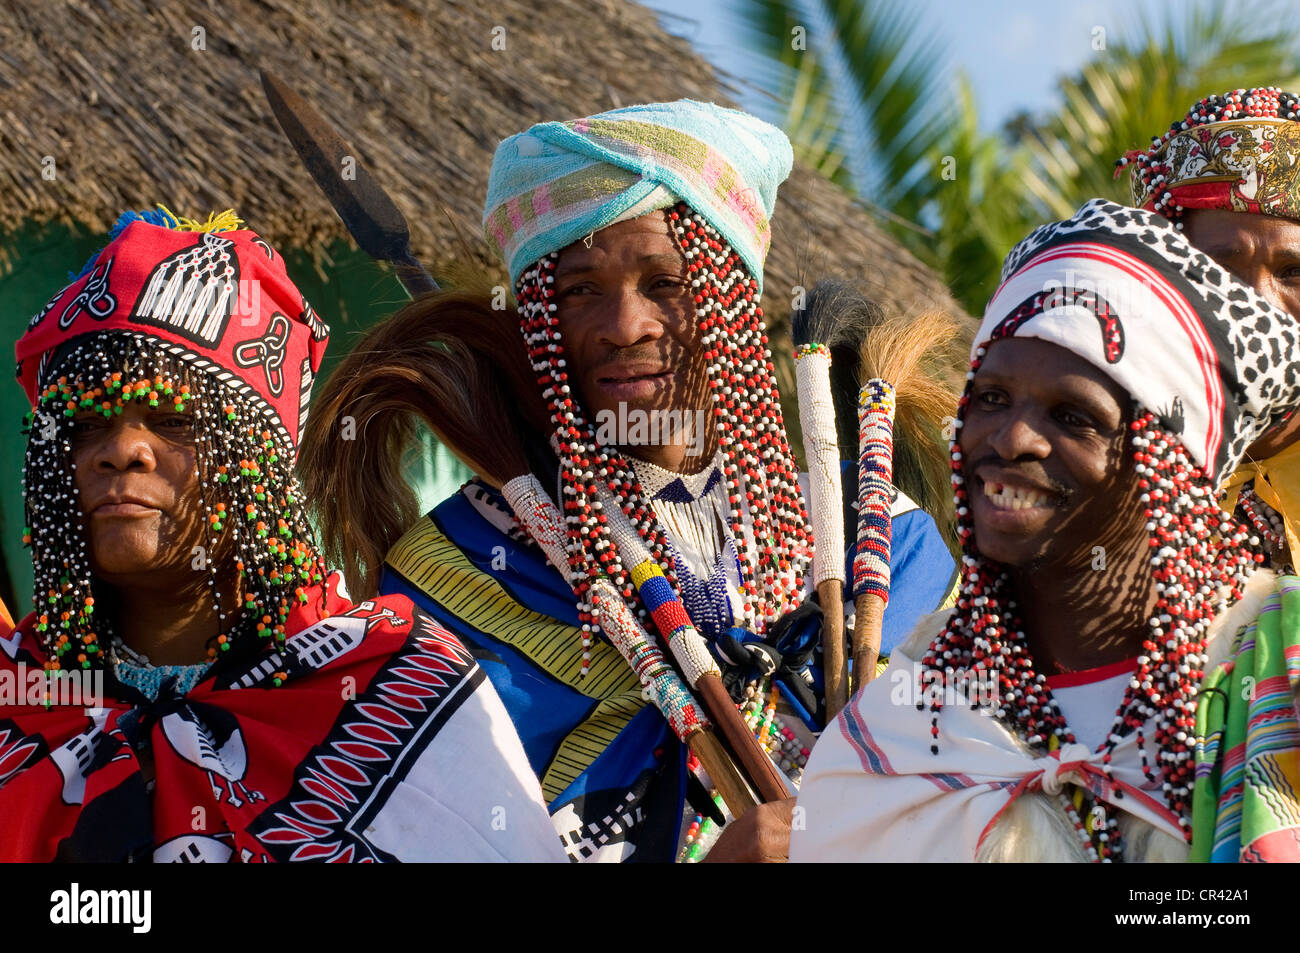 Traditionally dressed Xhosa people, during the Sangoma or Witchdoctor Festival, Wild Coast, Eastern Cape, South Africa, Africa Stock Photo